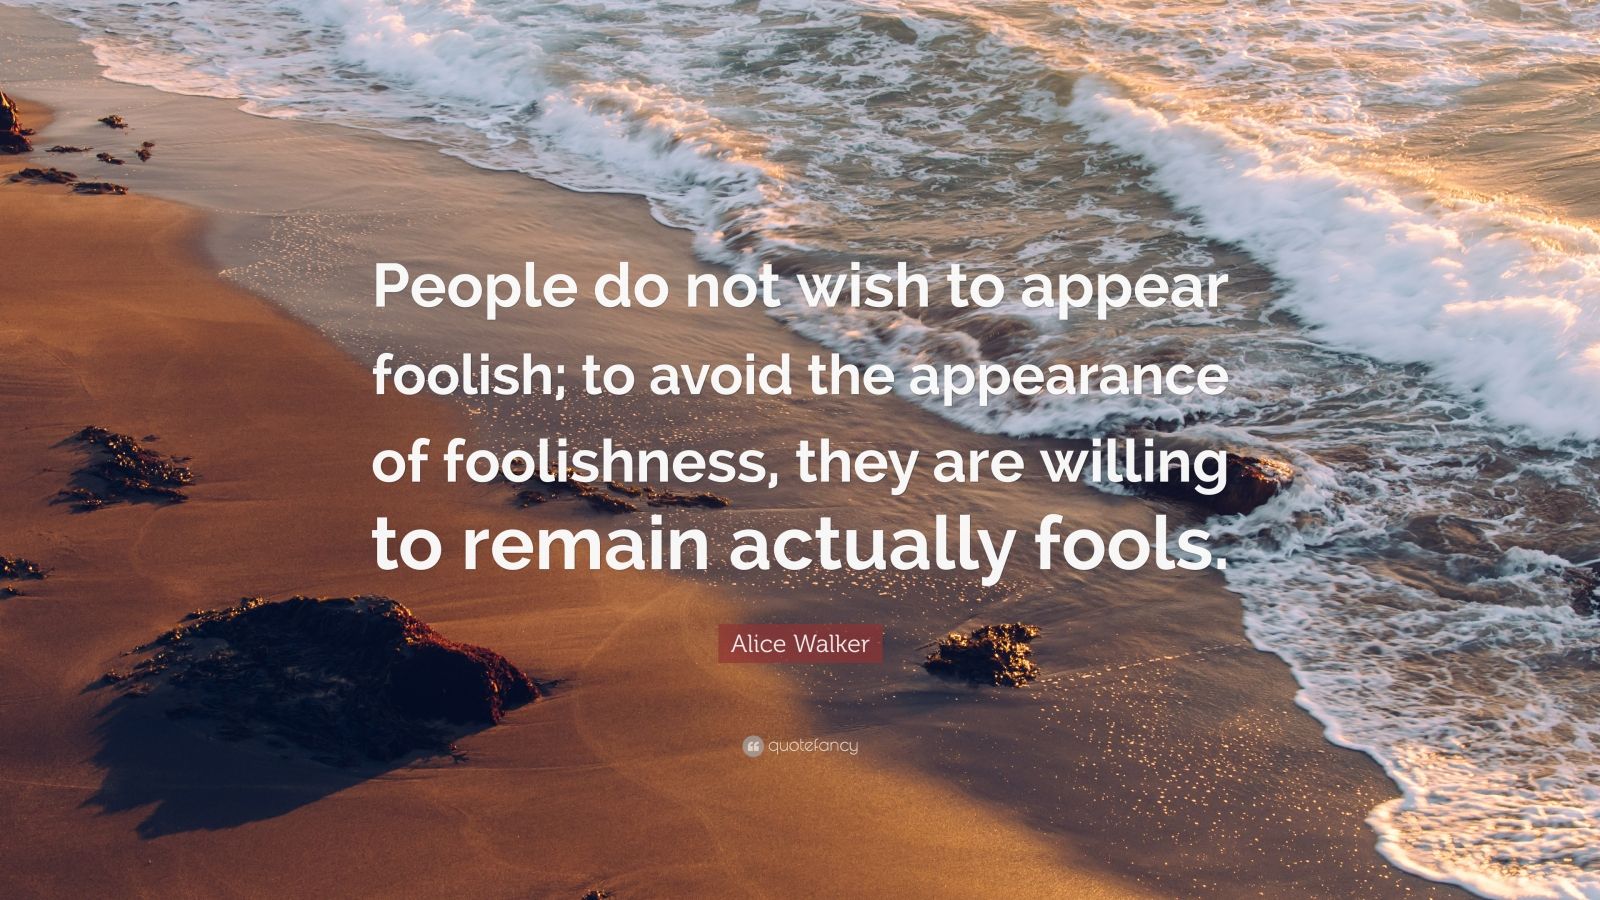 Alice Walker Quote: “People do not wish to appear foolish; to avoid the ...